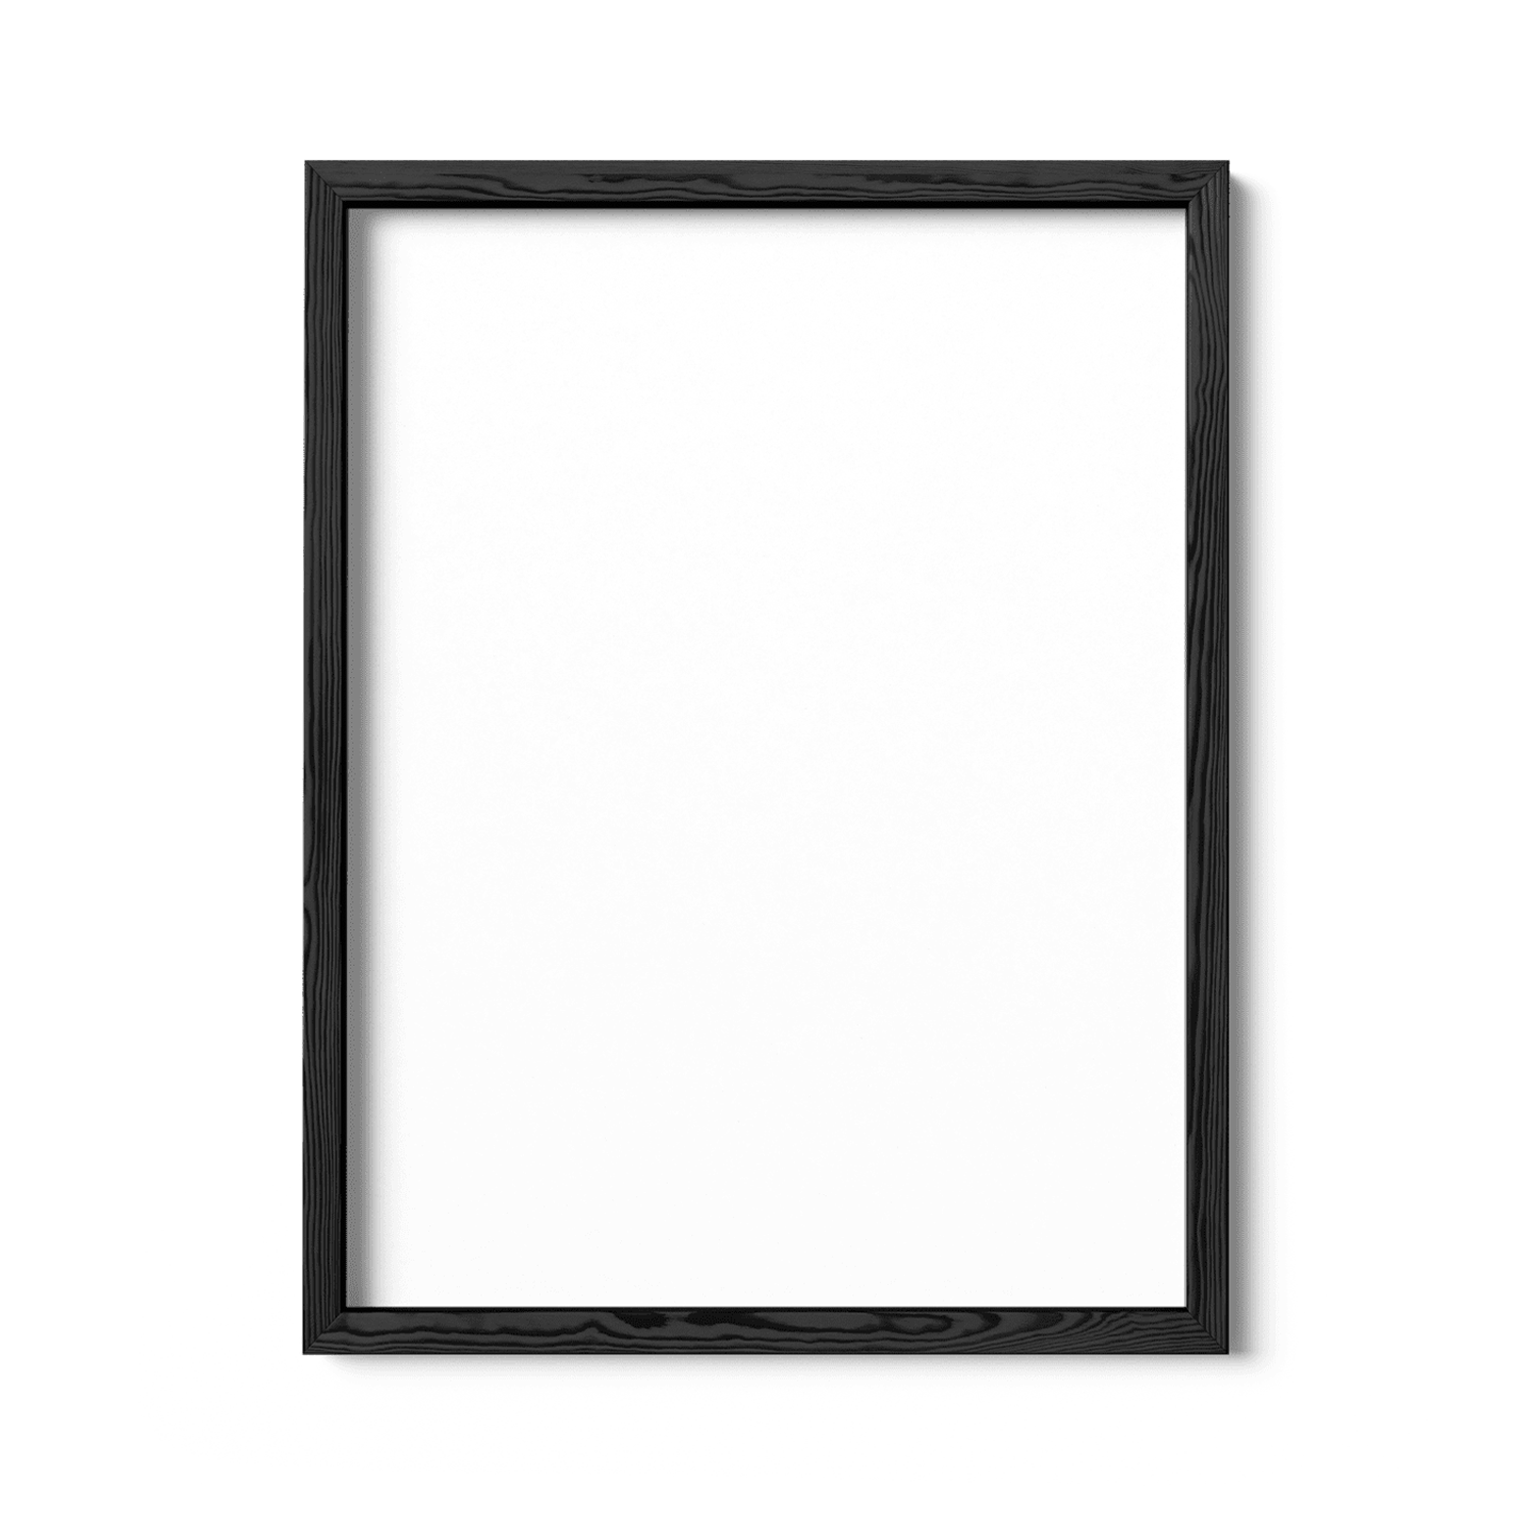 100 Horror Movies Scratch-Off Chart Frame